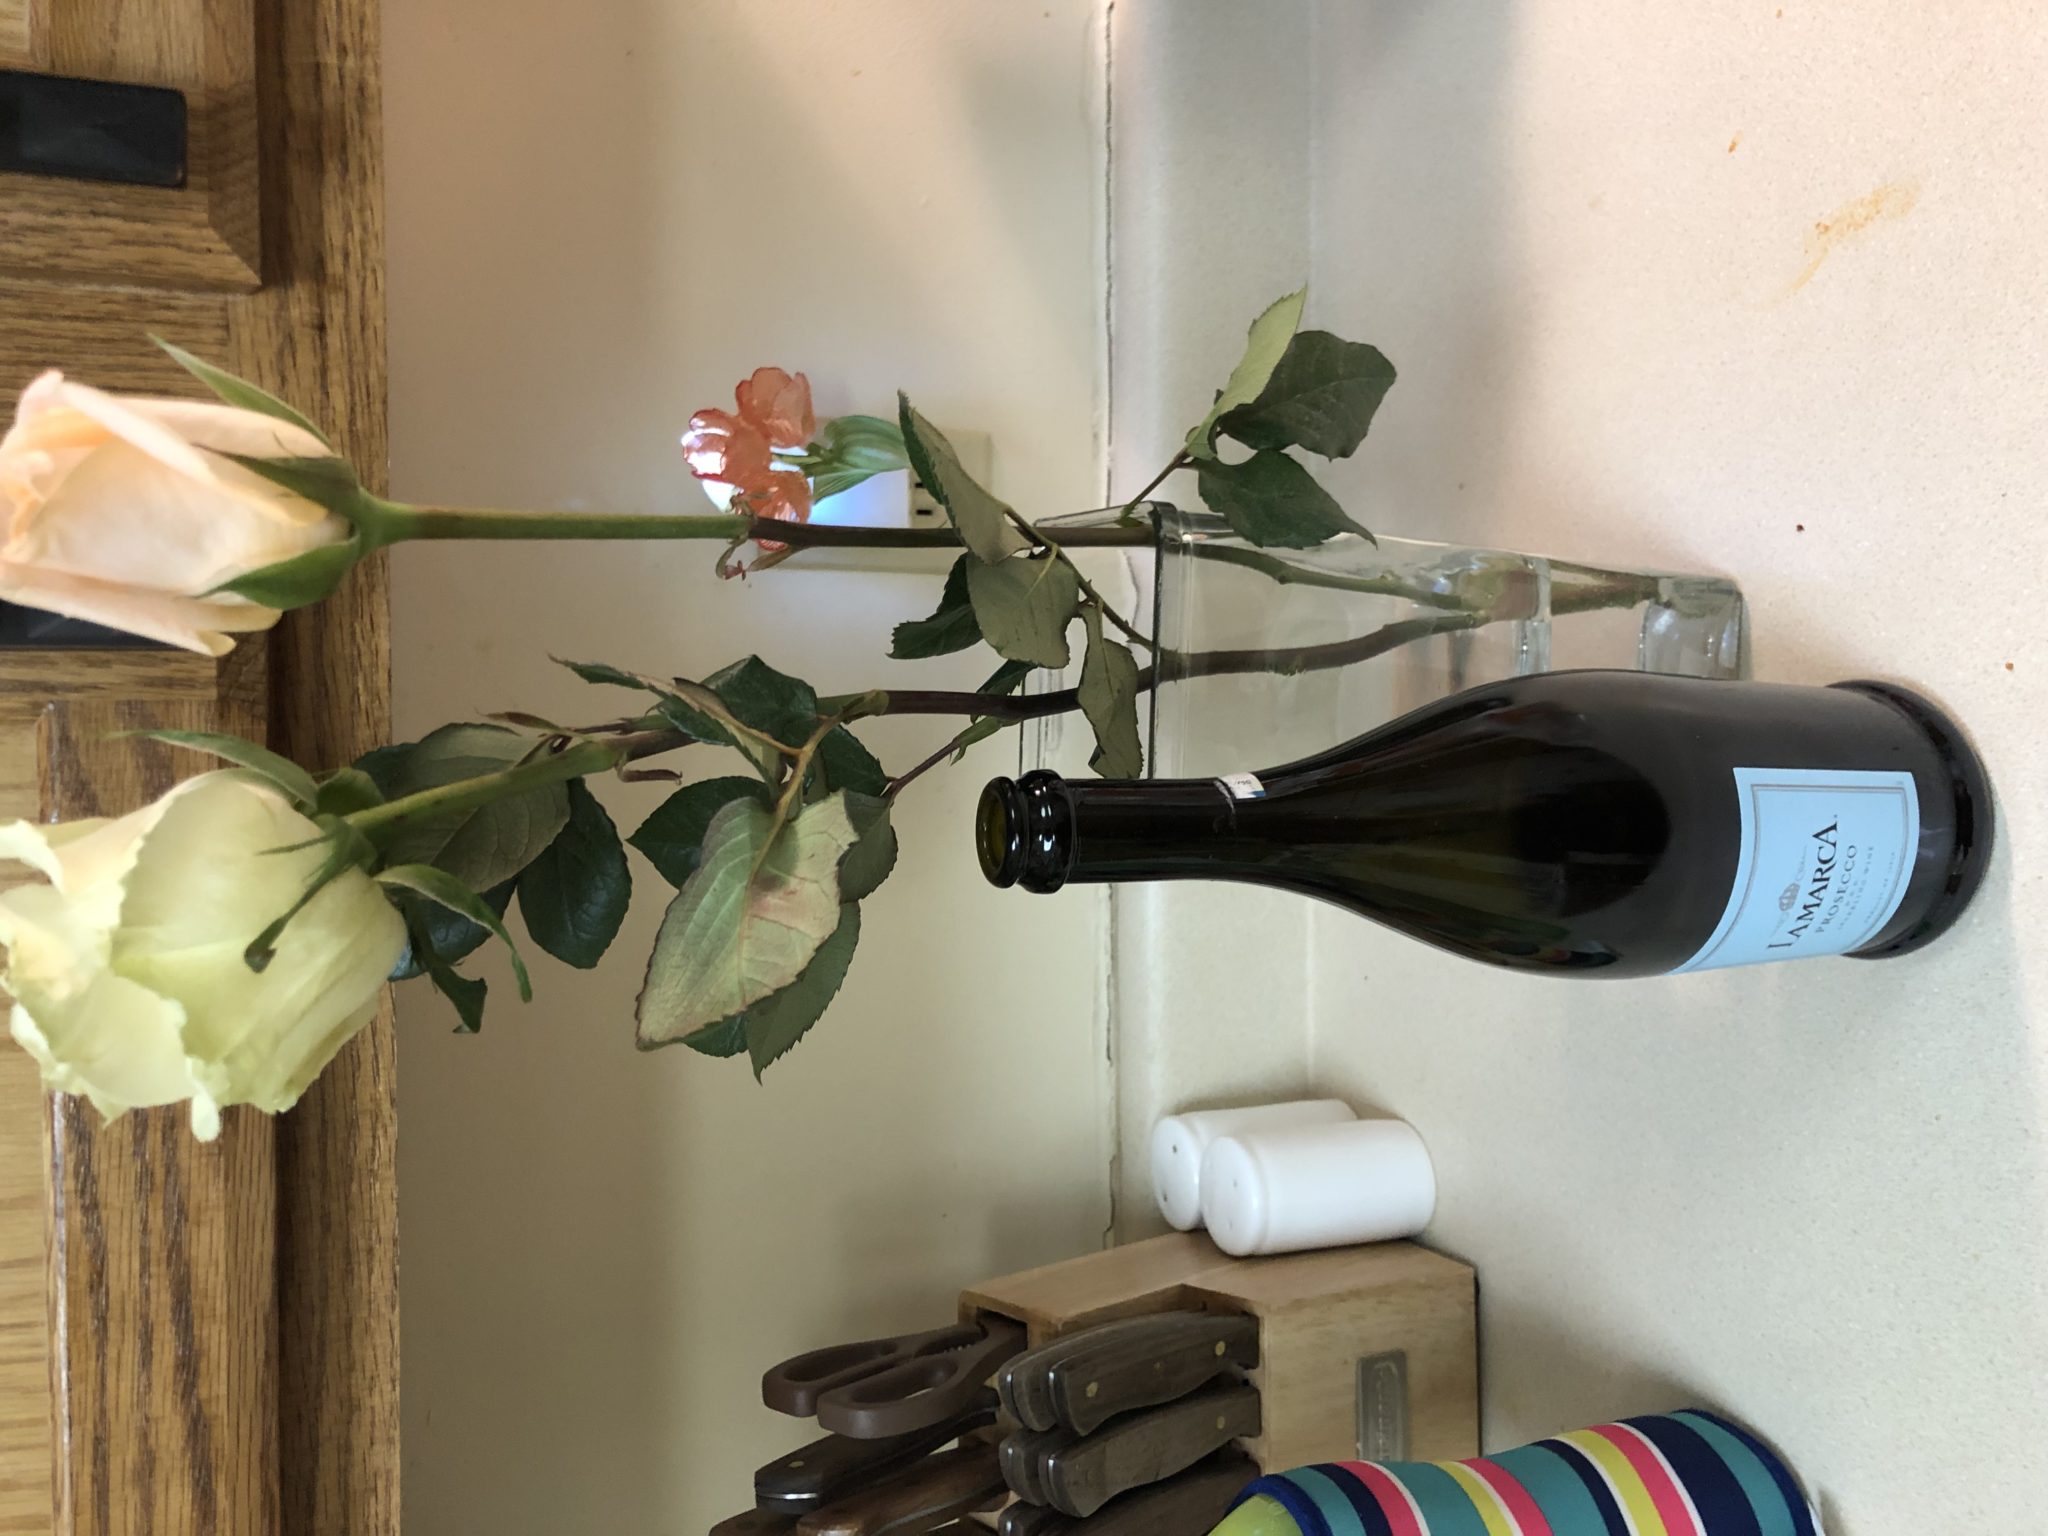 Flowers and wine